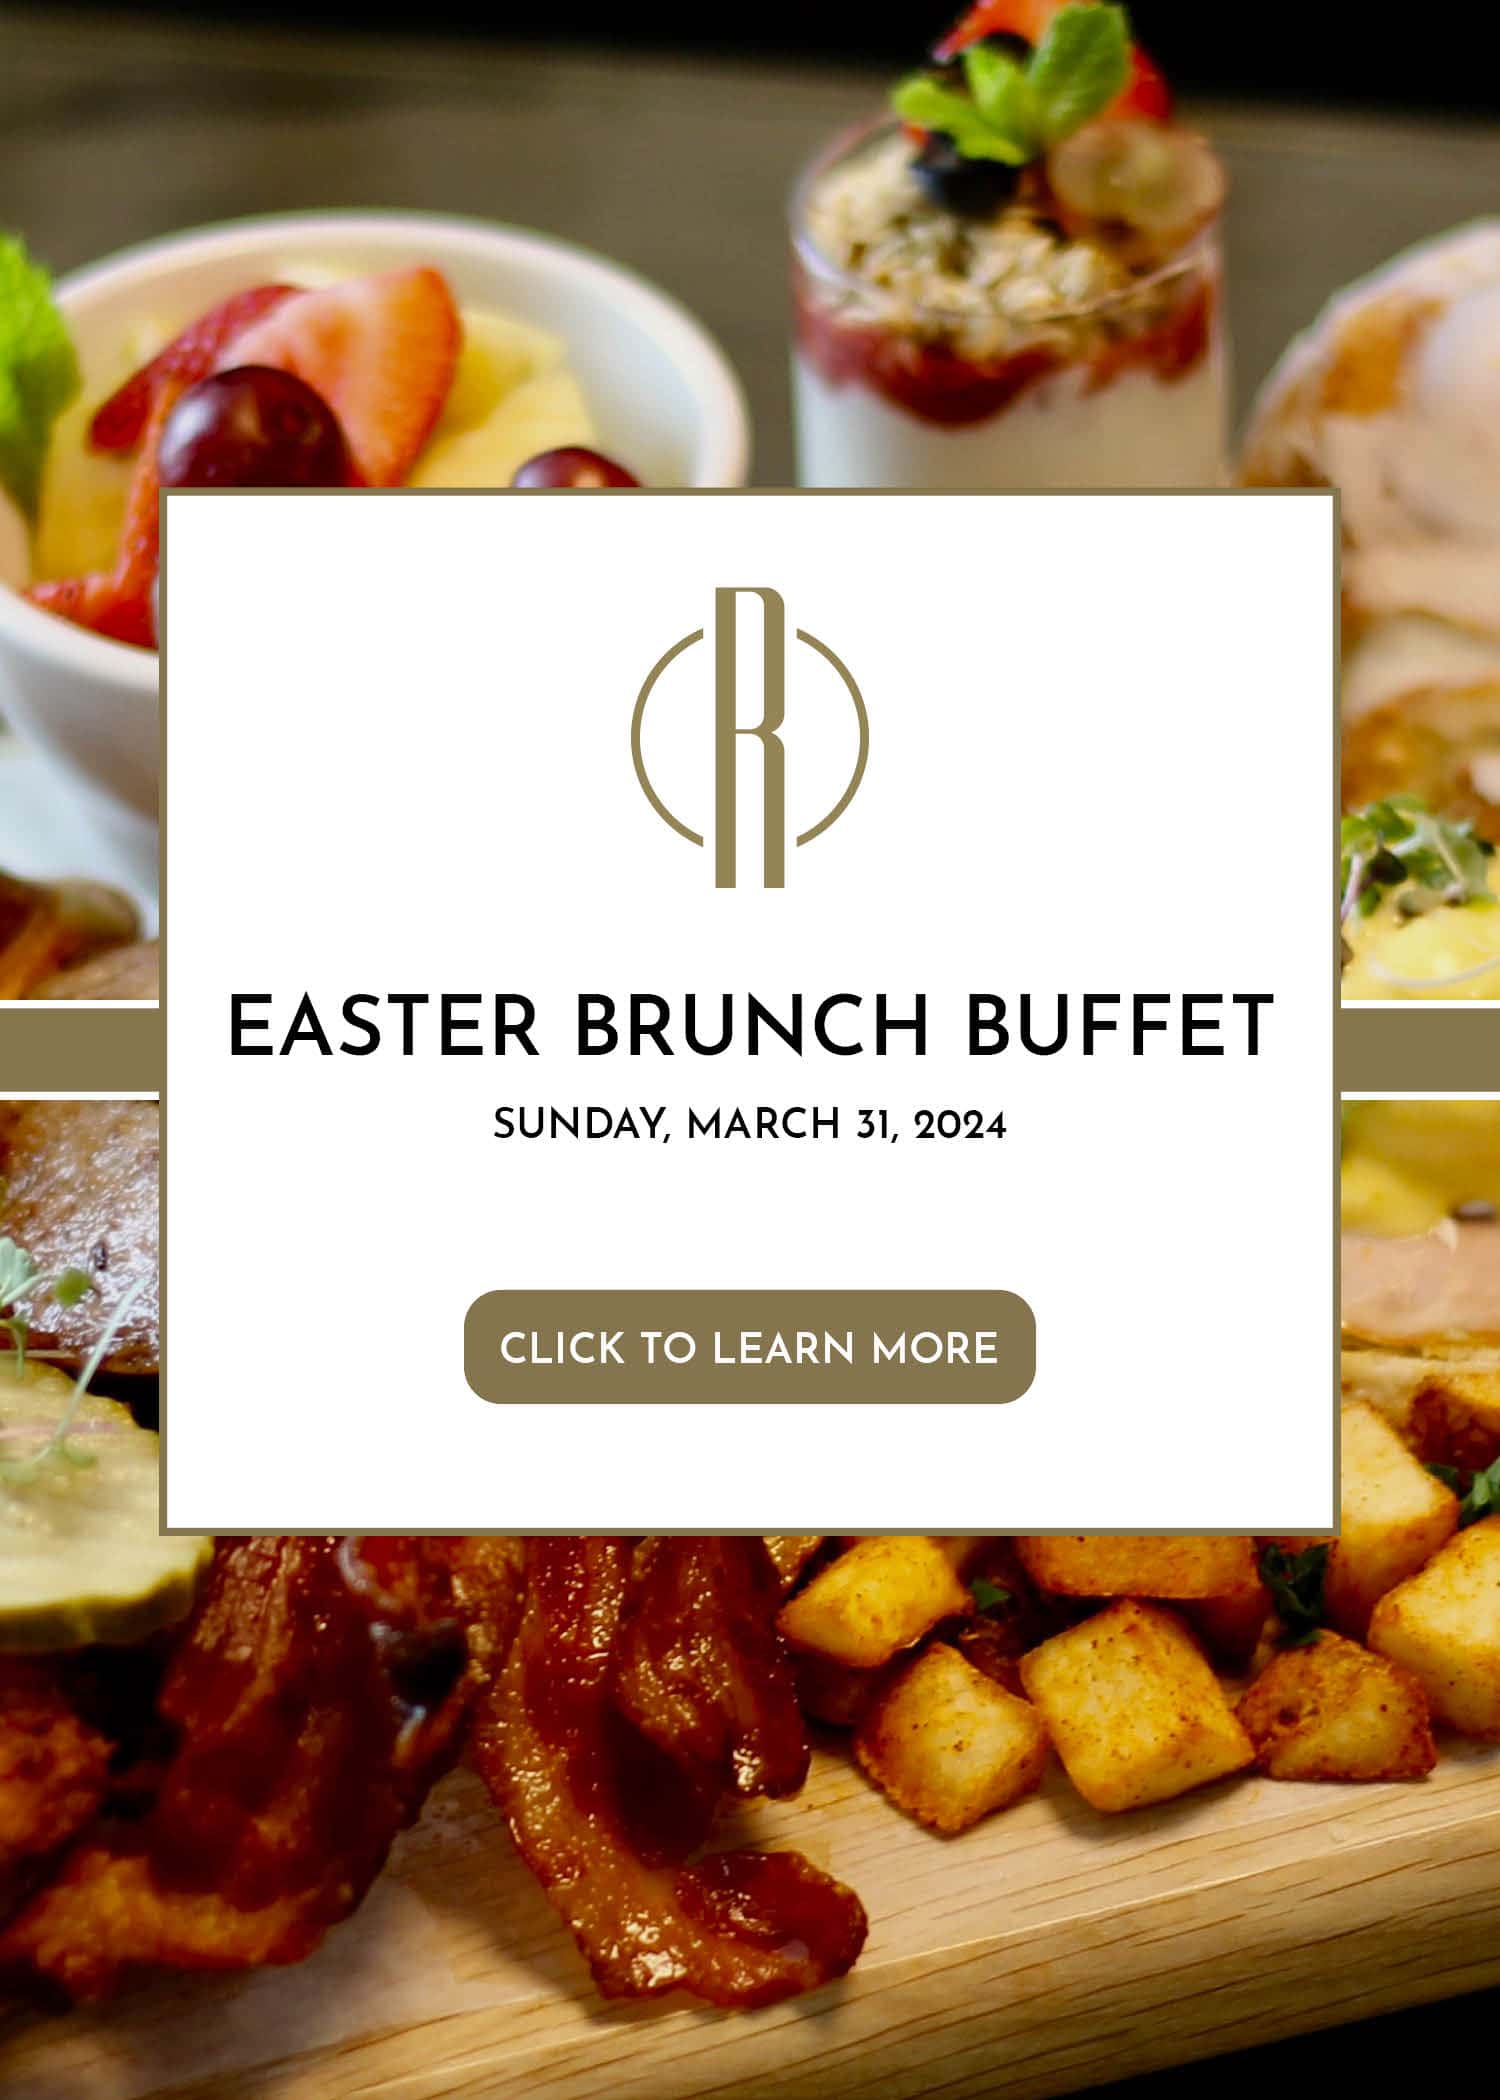 Braiser Bar & Grill is 10/10! Prefect for a brunch, dinner and